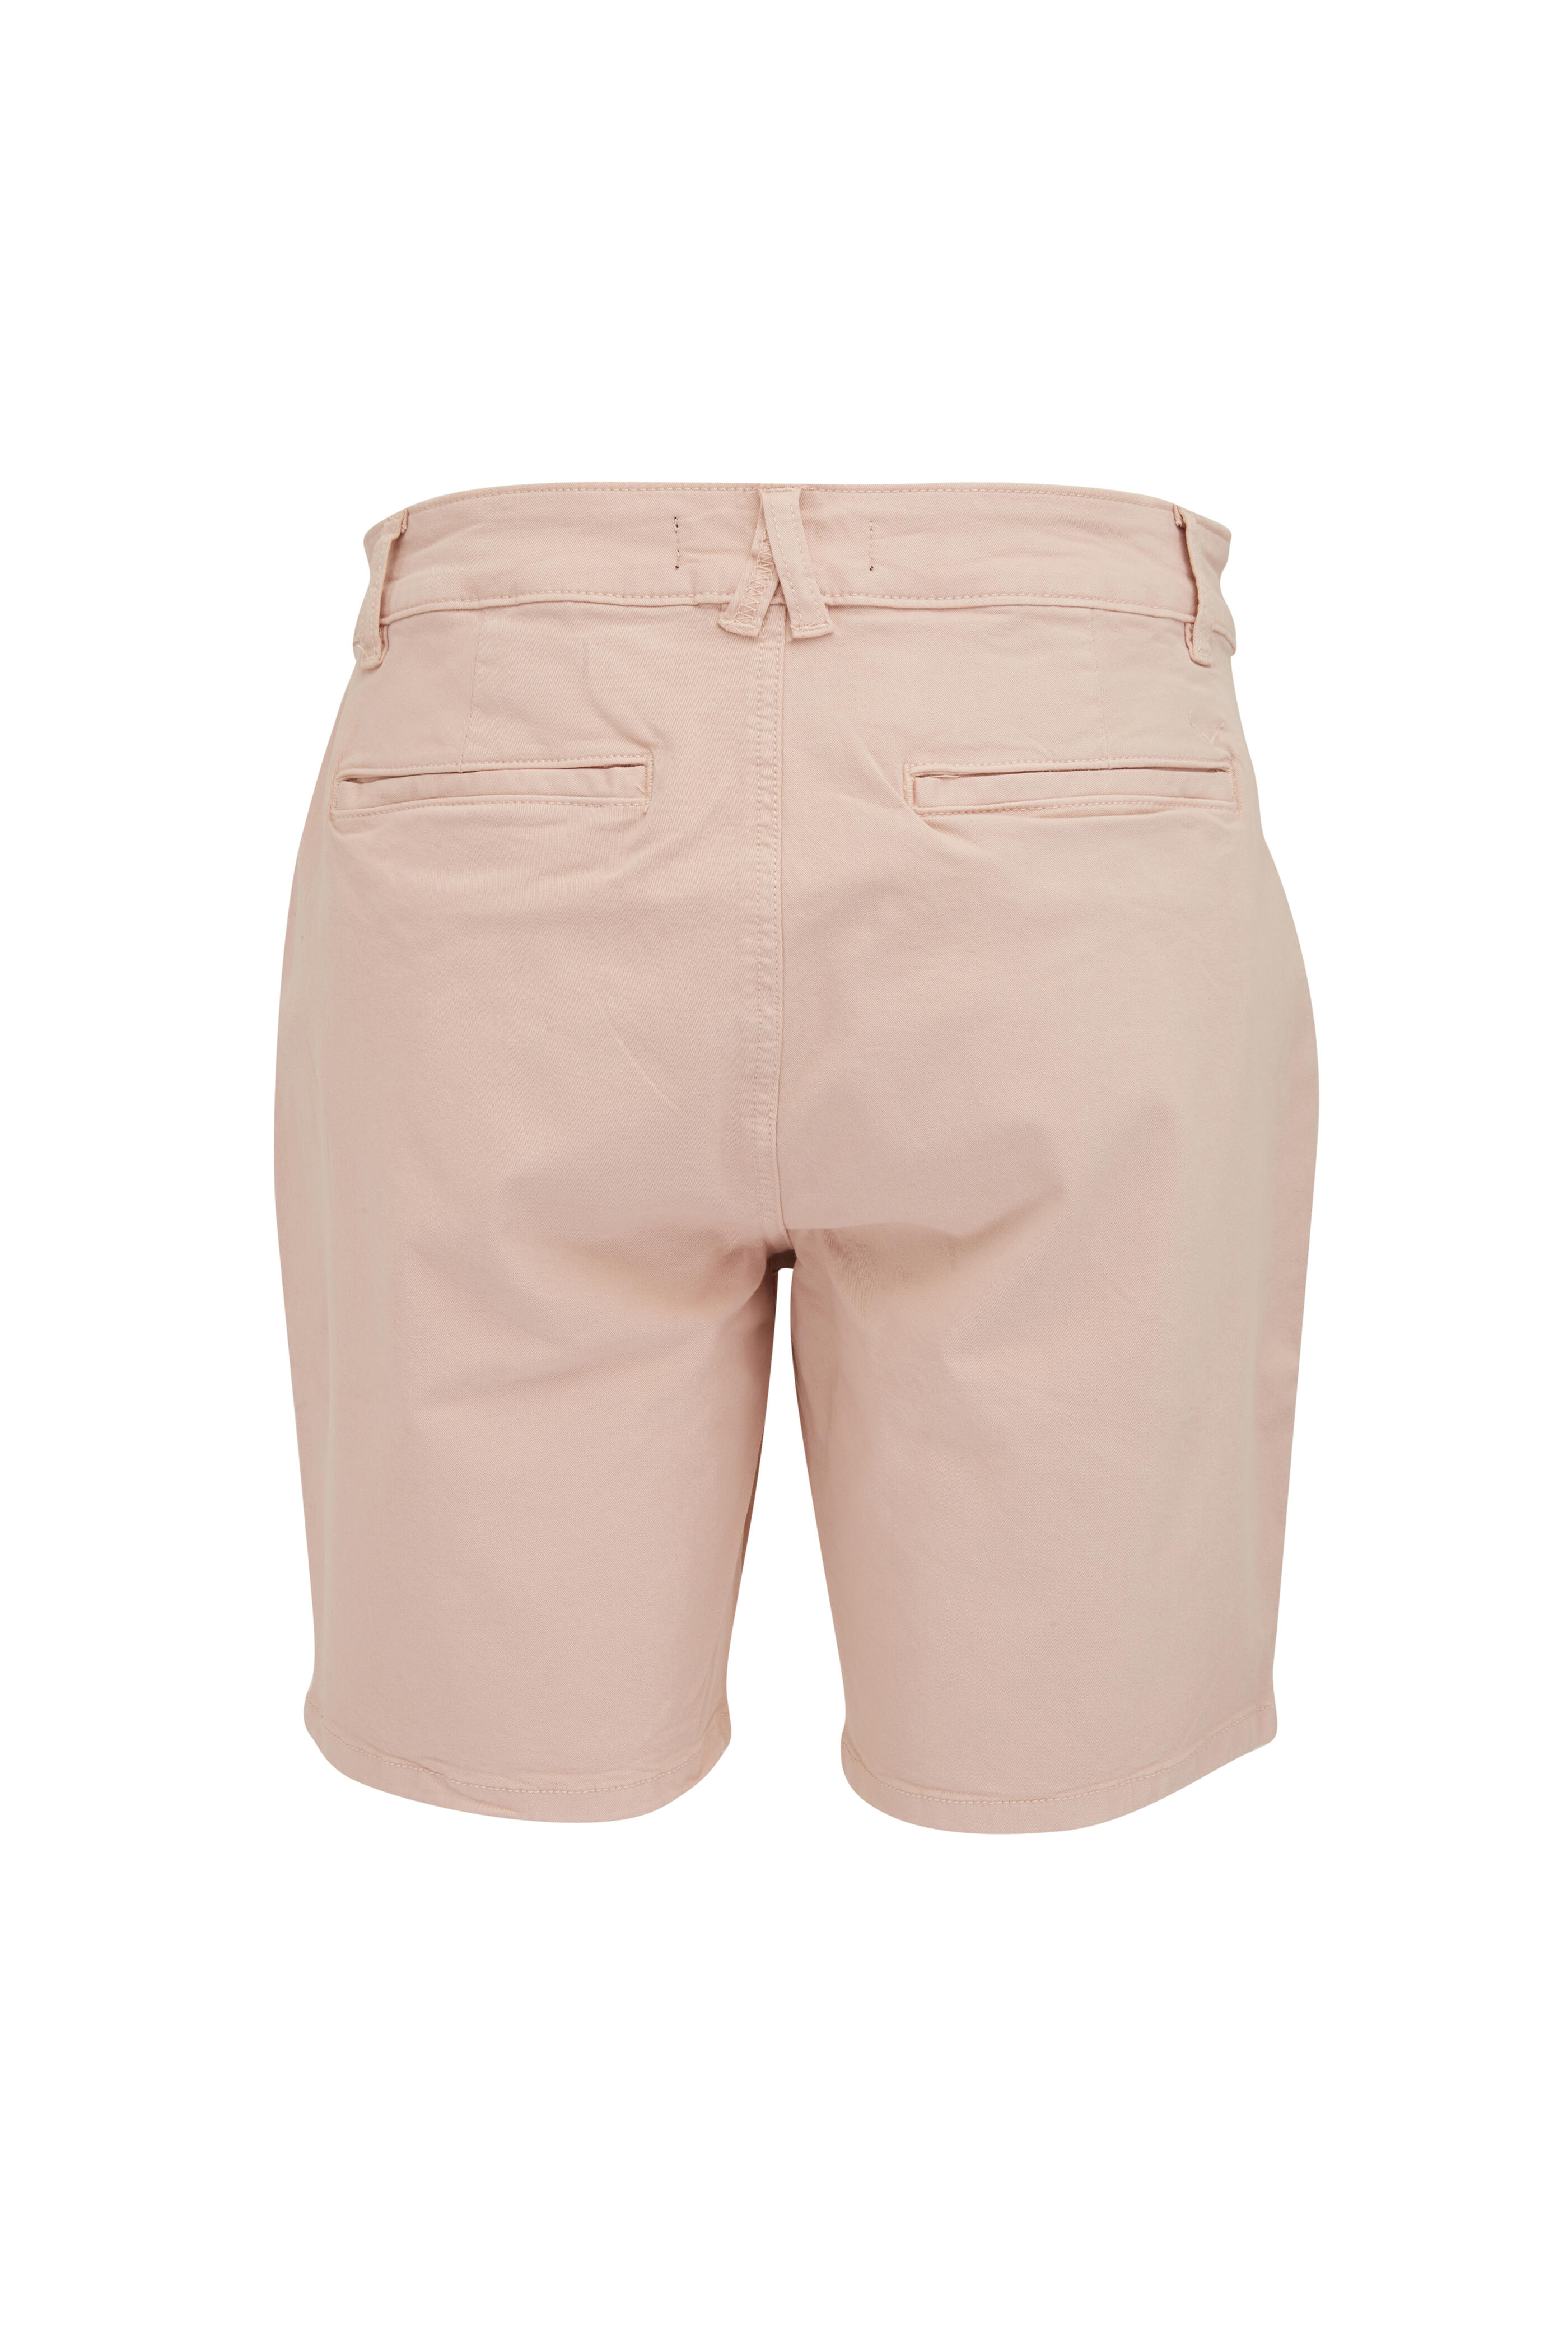 Hudson Clothing - Light Coral Chino Shorts | Mitchell Stores